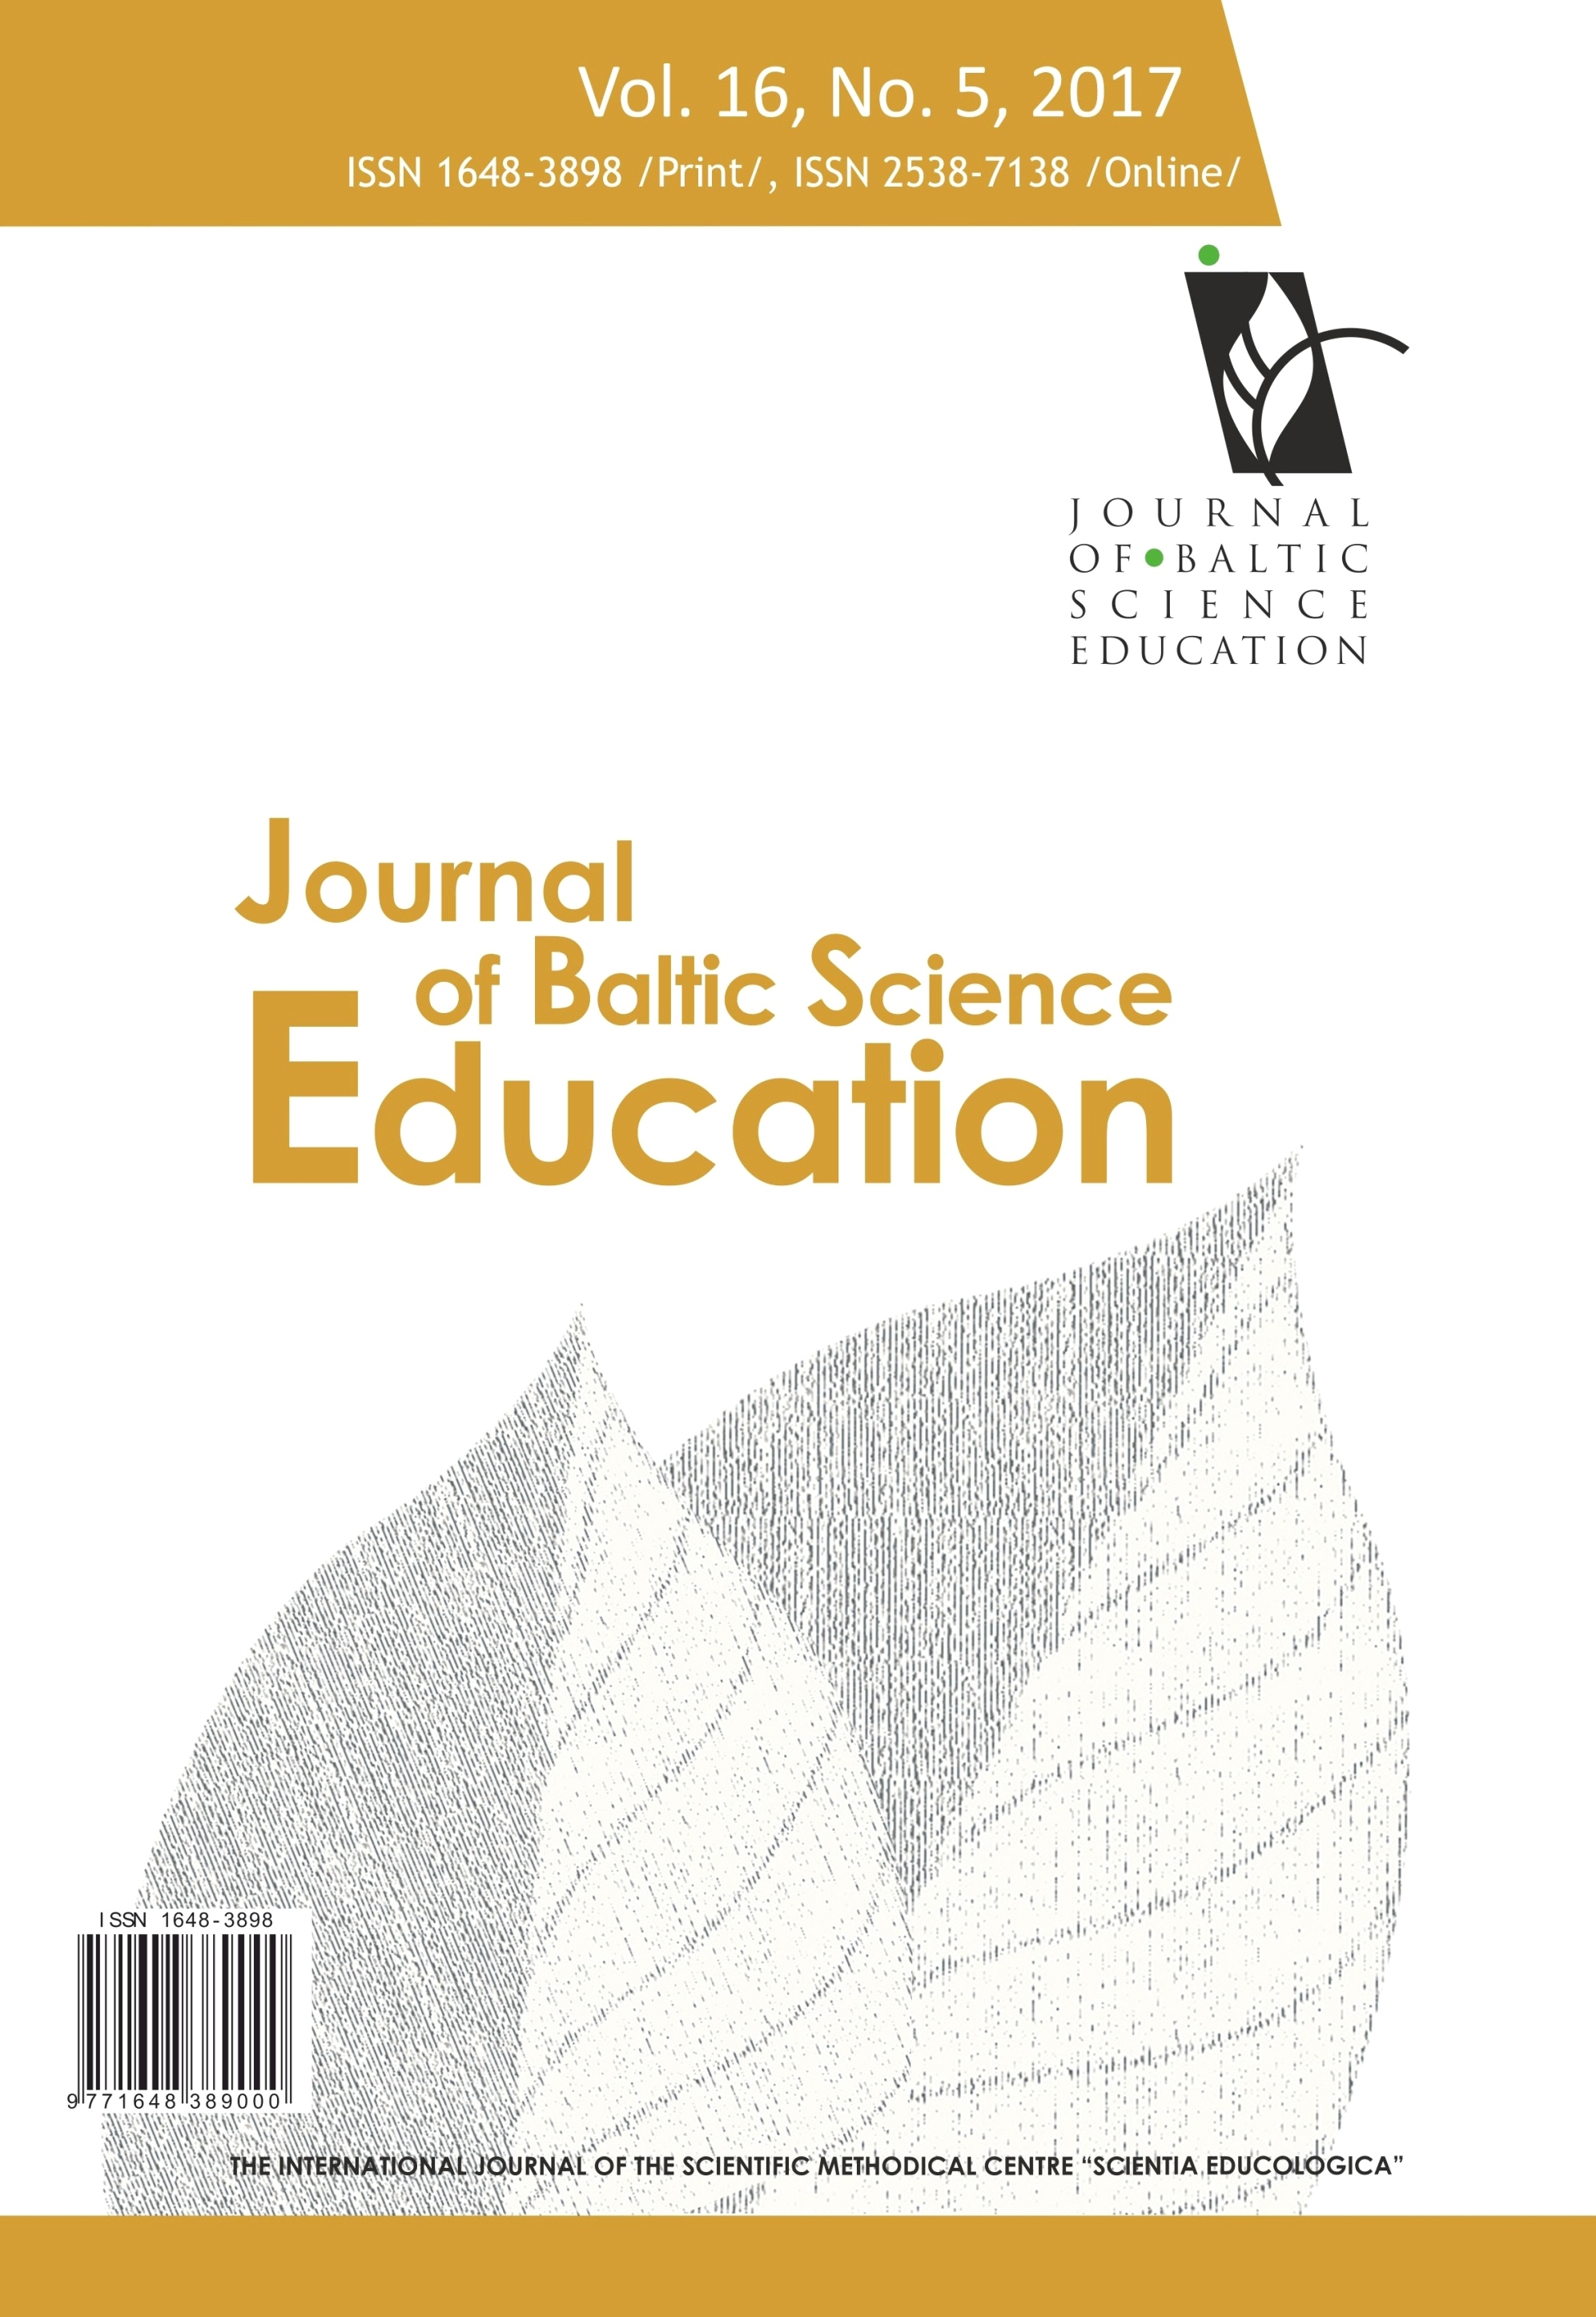 THE APPLICATION OF CONCEPT MAPS IN THE TEACHING OF POLLINATION AND POLLINATORS IN ELEMENTARY SCHOOL Cover Image